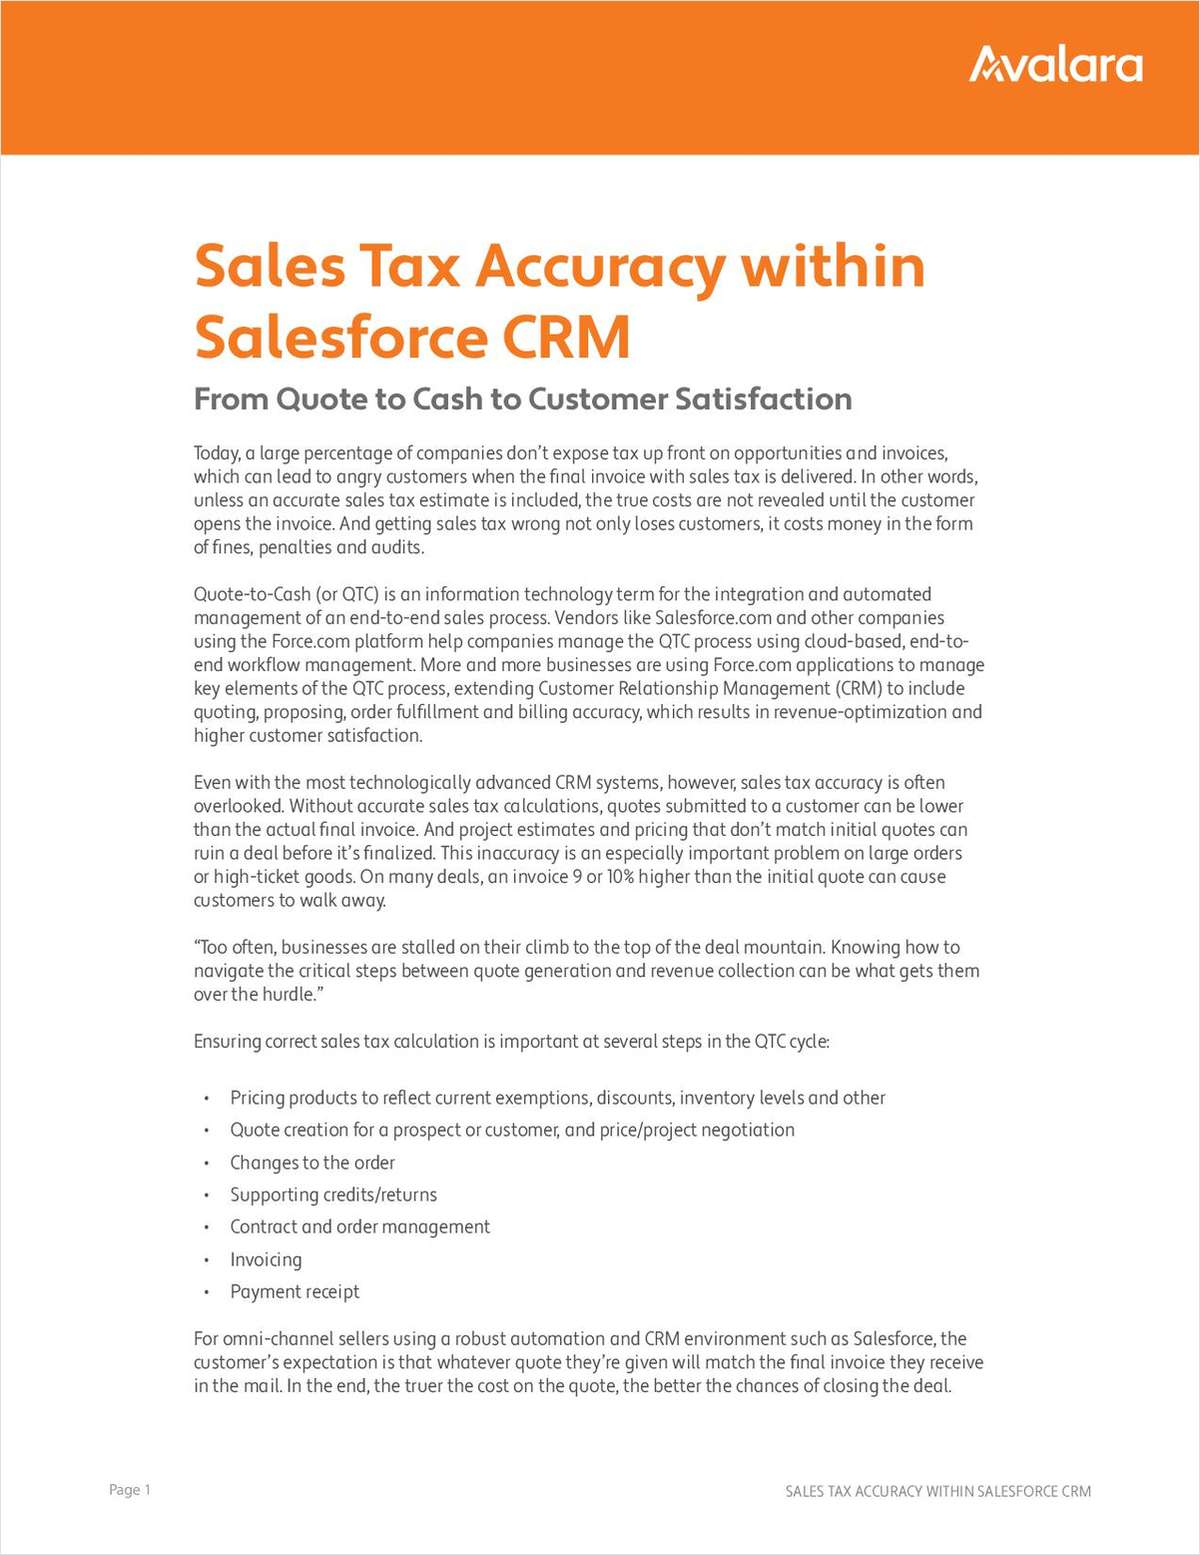 From Quote to Cash to Customer Satisfaction: Sales Tax Accuracy within Your CRM